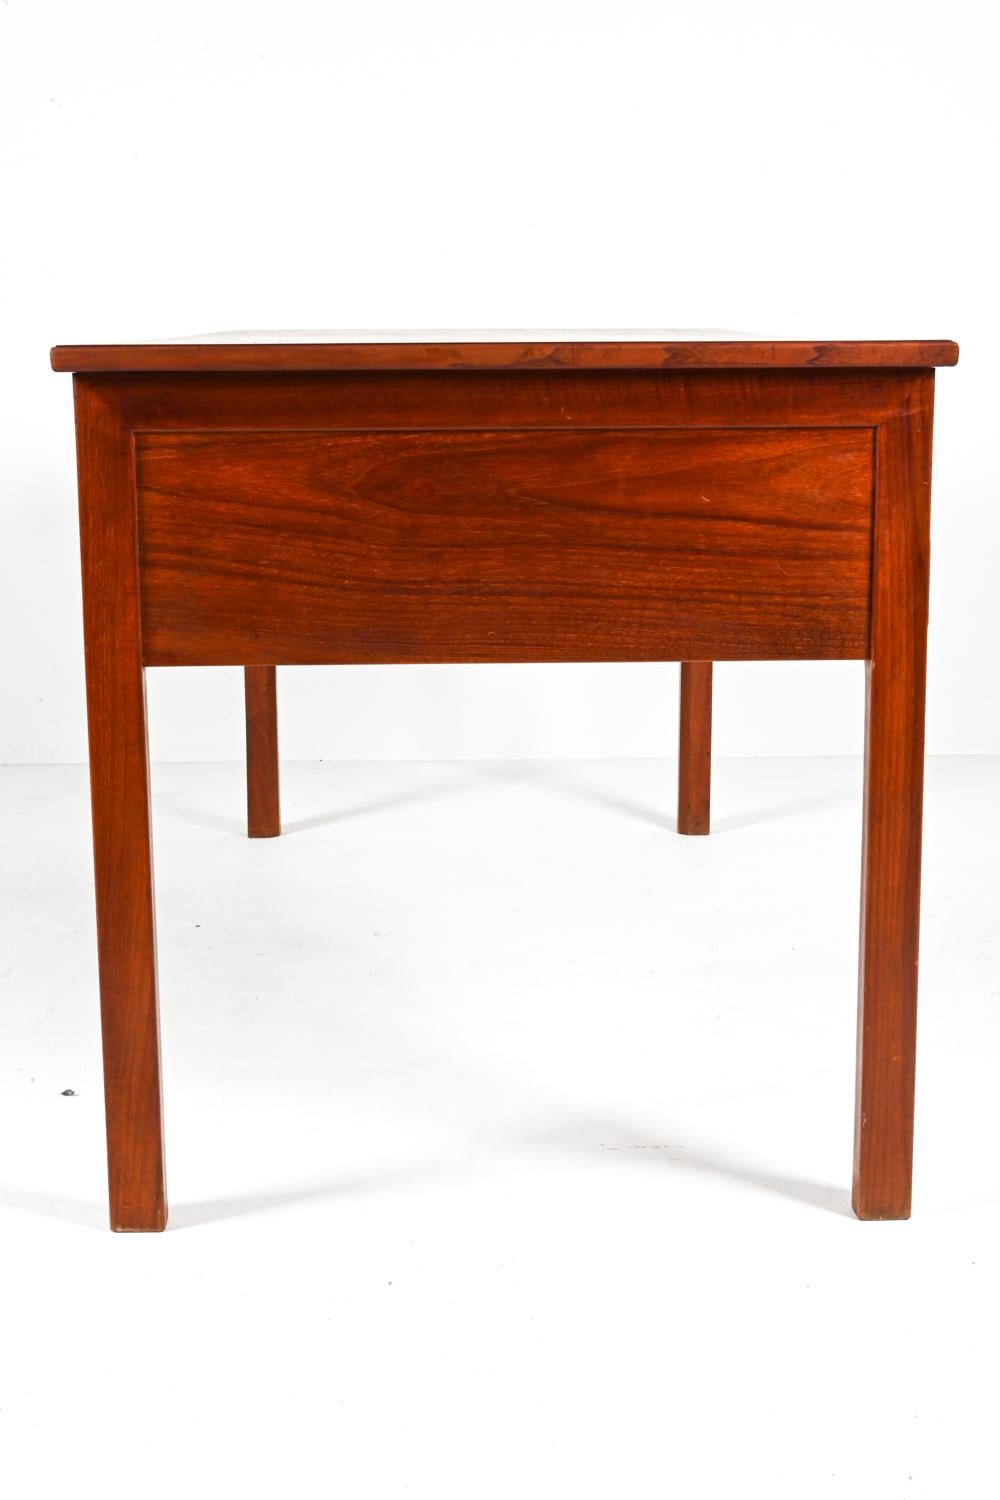 Danish Mahogany Executive Writing Desk by Ole Wanscher, c. 1950's For Sale 14